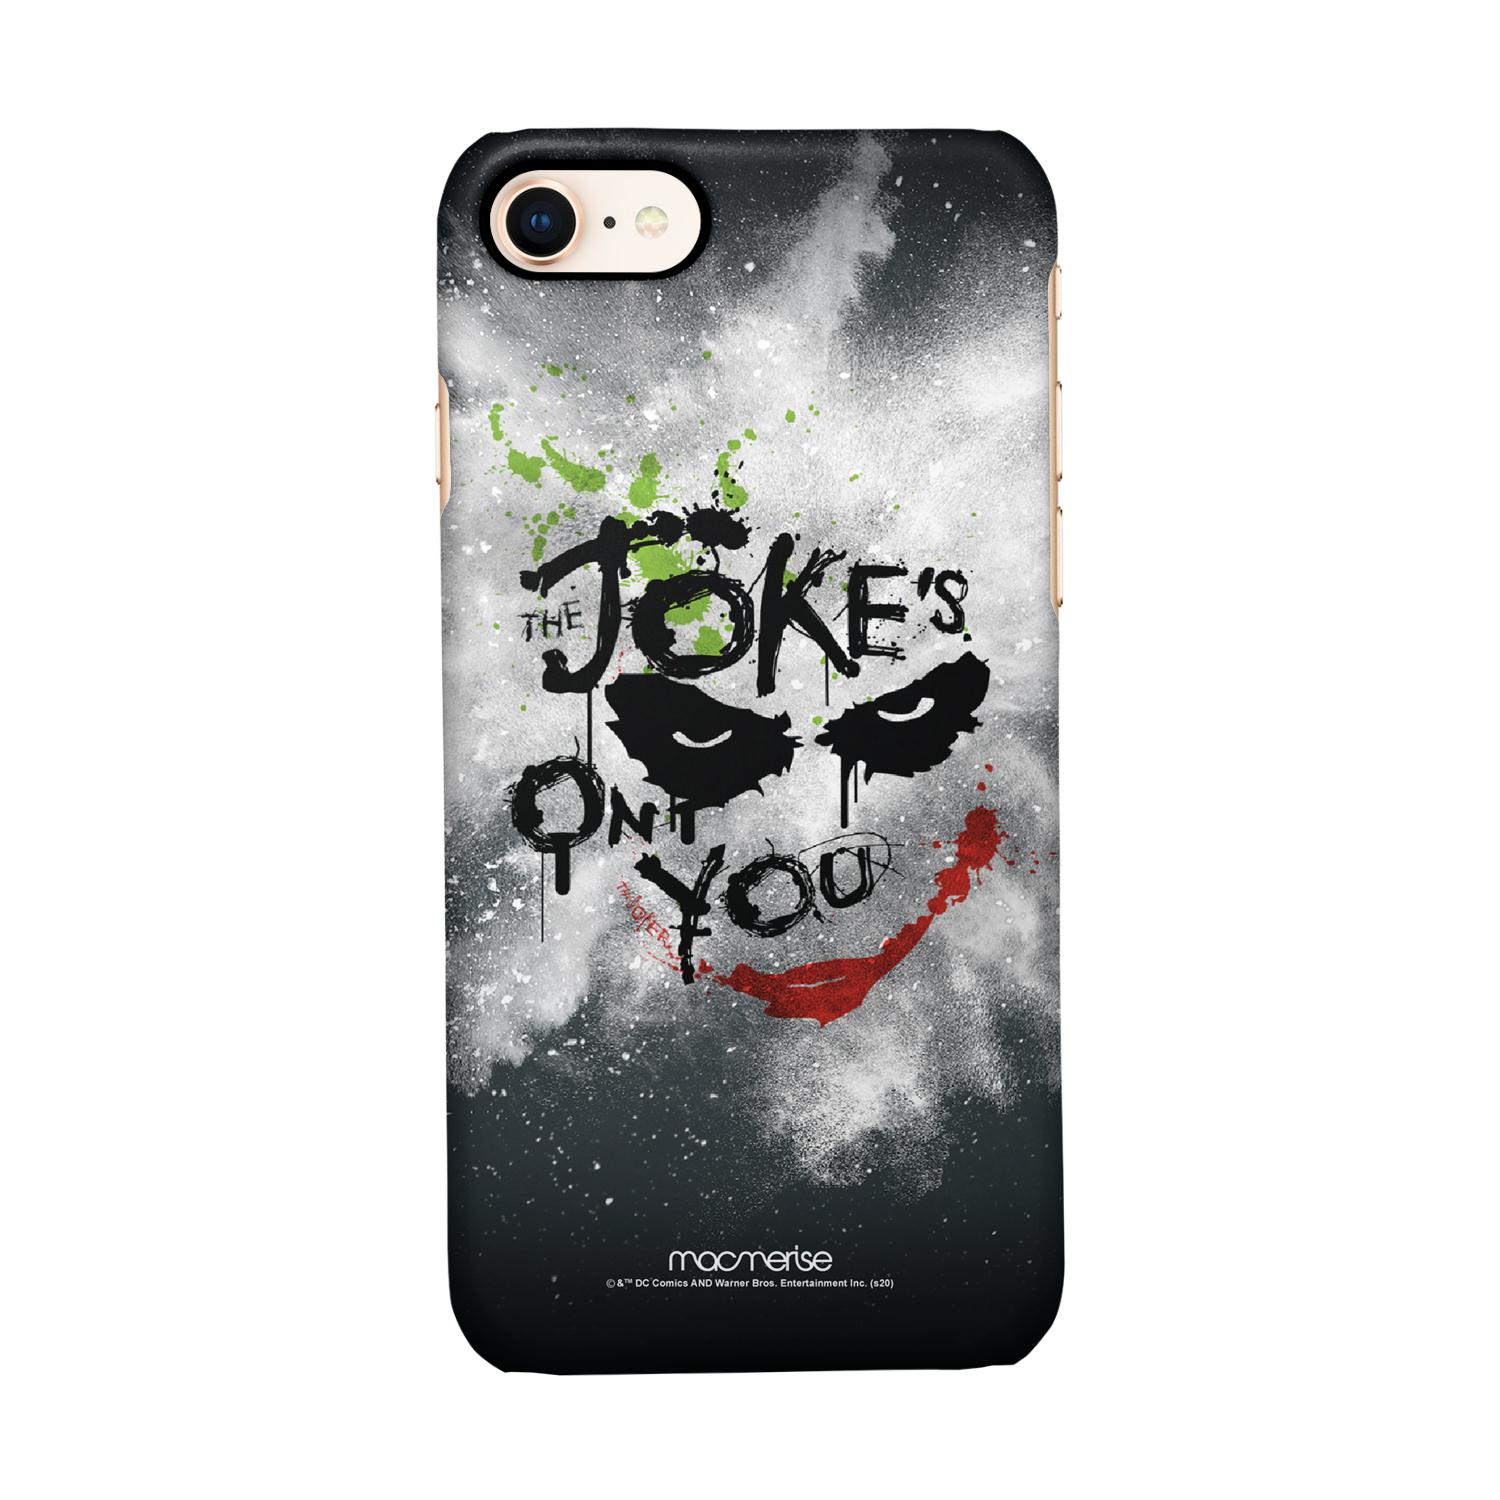 The Jokes on you - Sleek Phone Case for iPhone 7